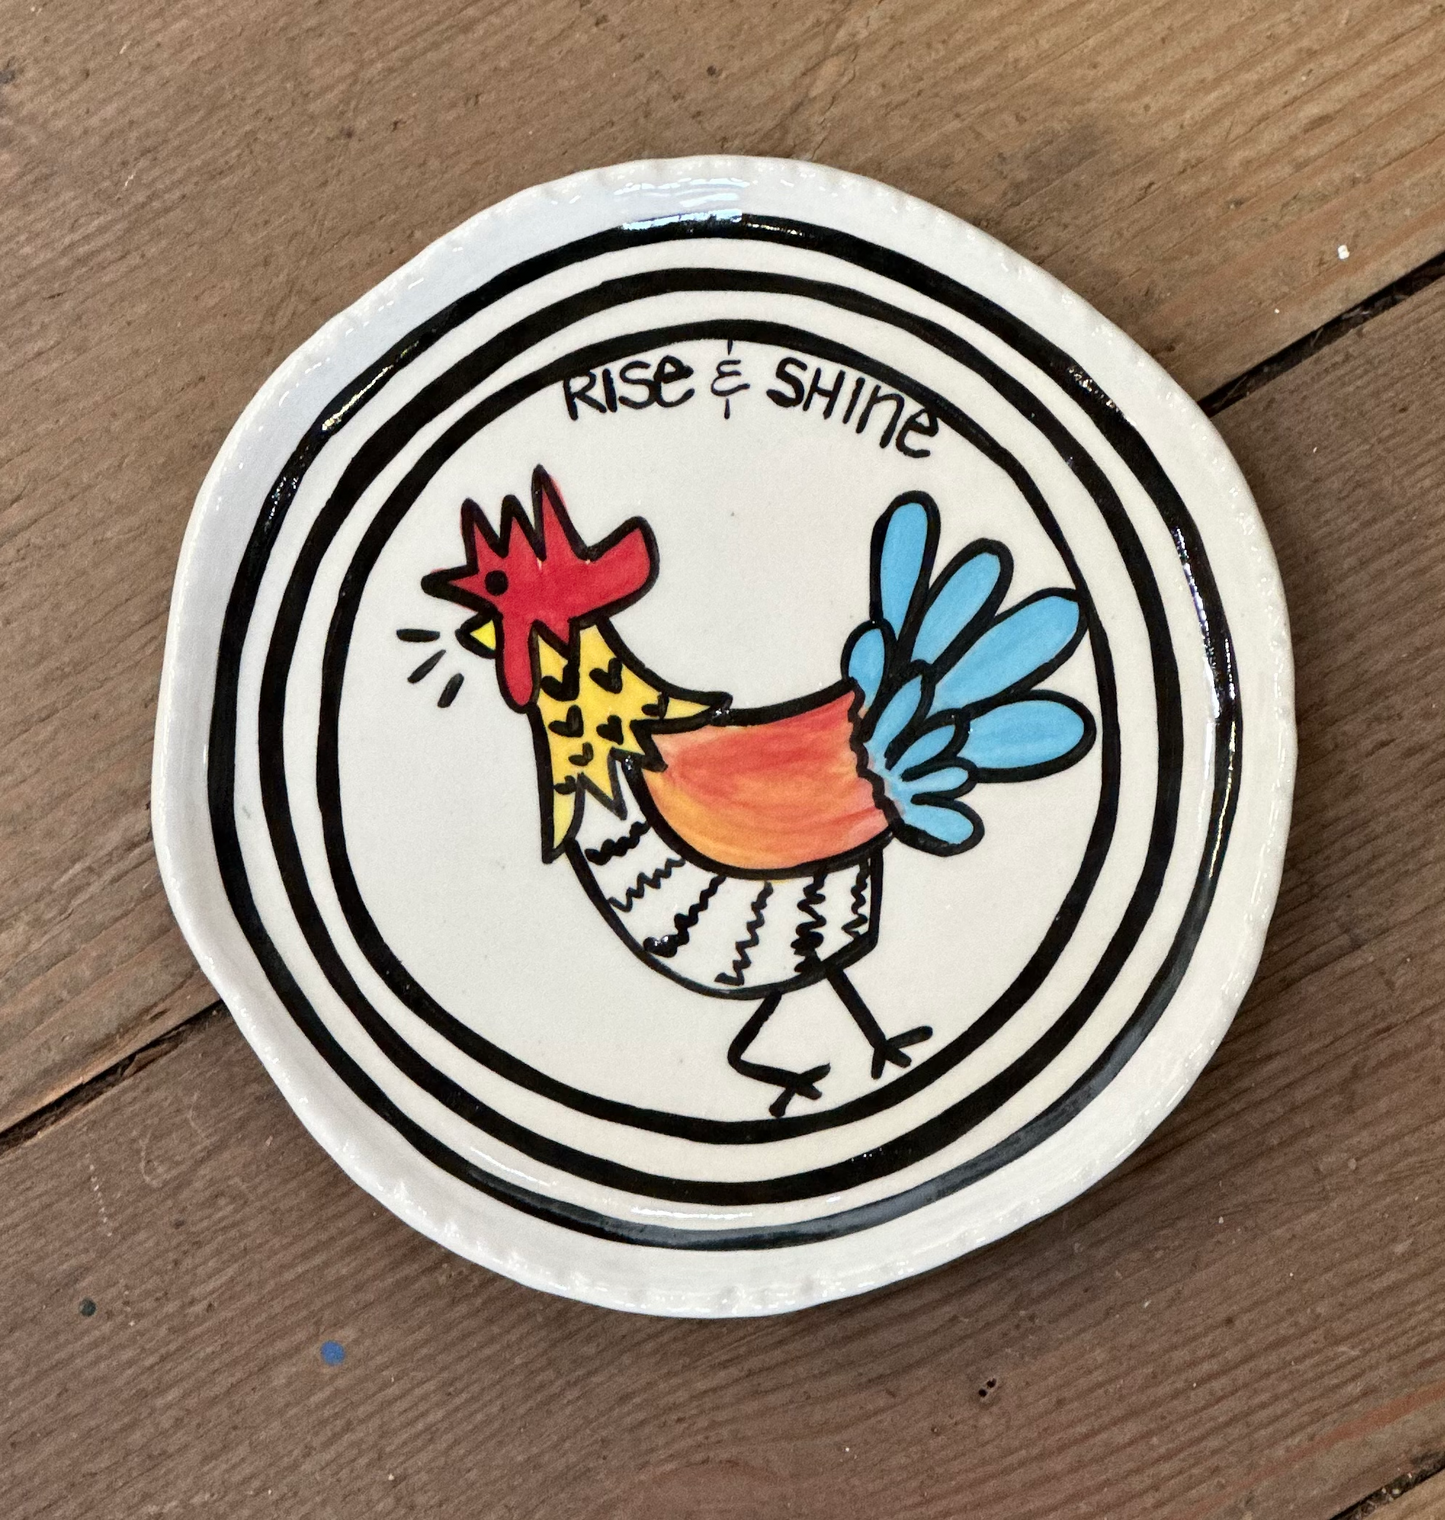 Rooster Kells Appetizer Plate "Cock a doodle doo"